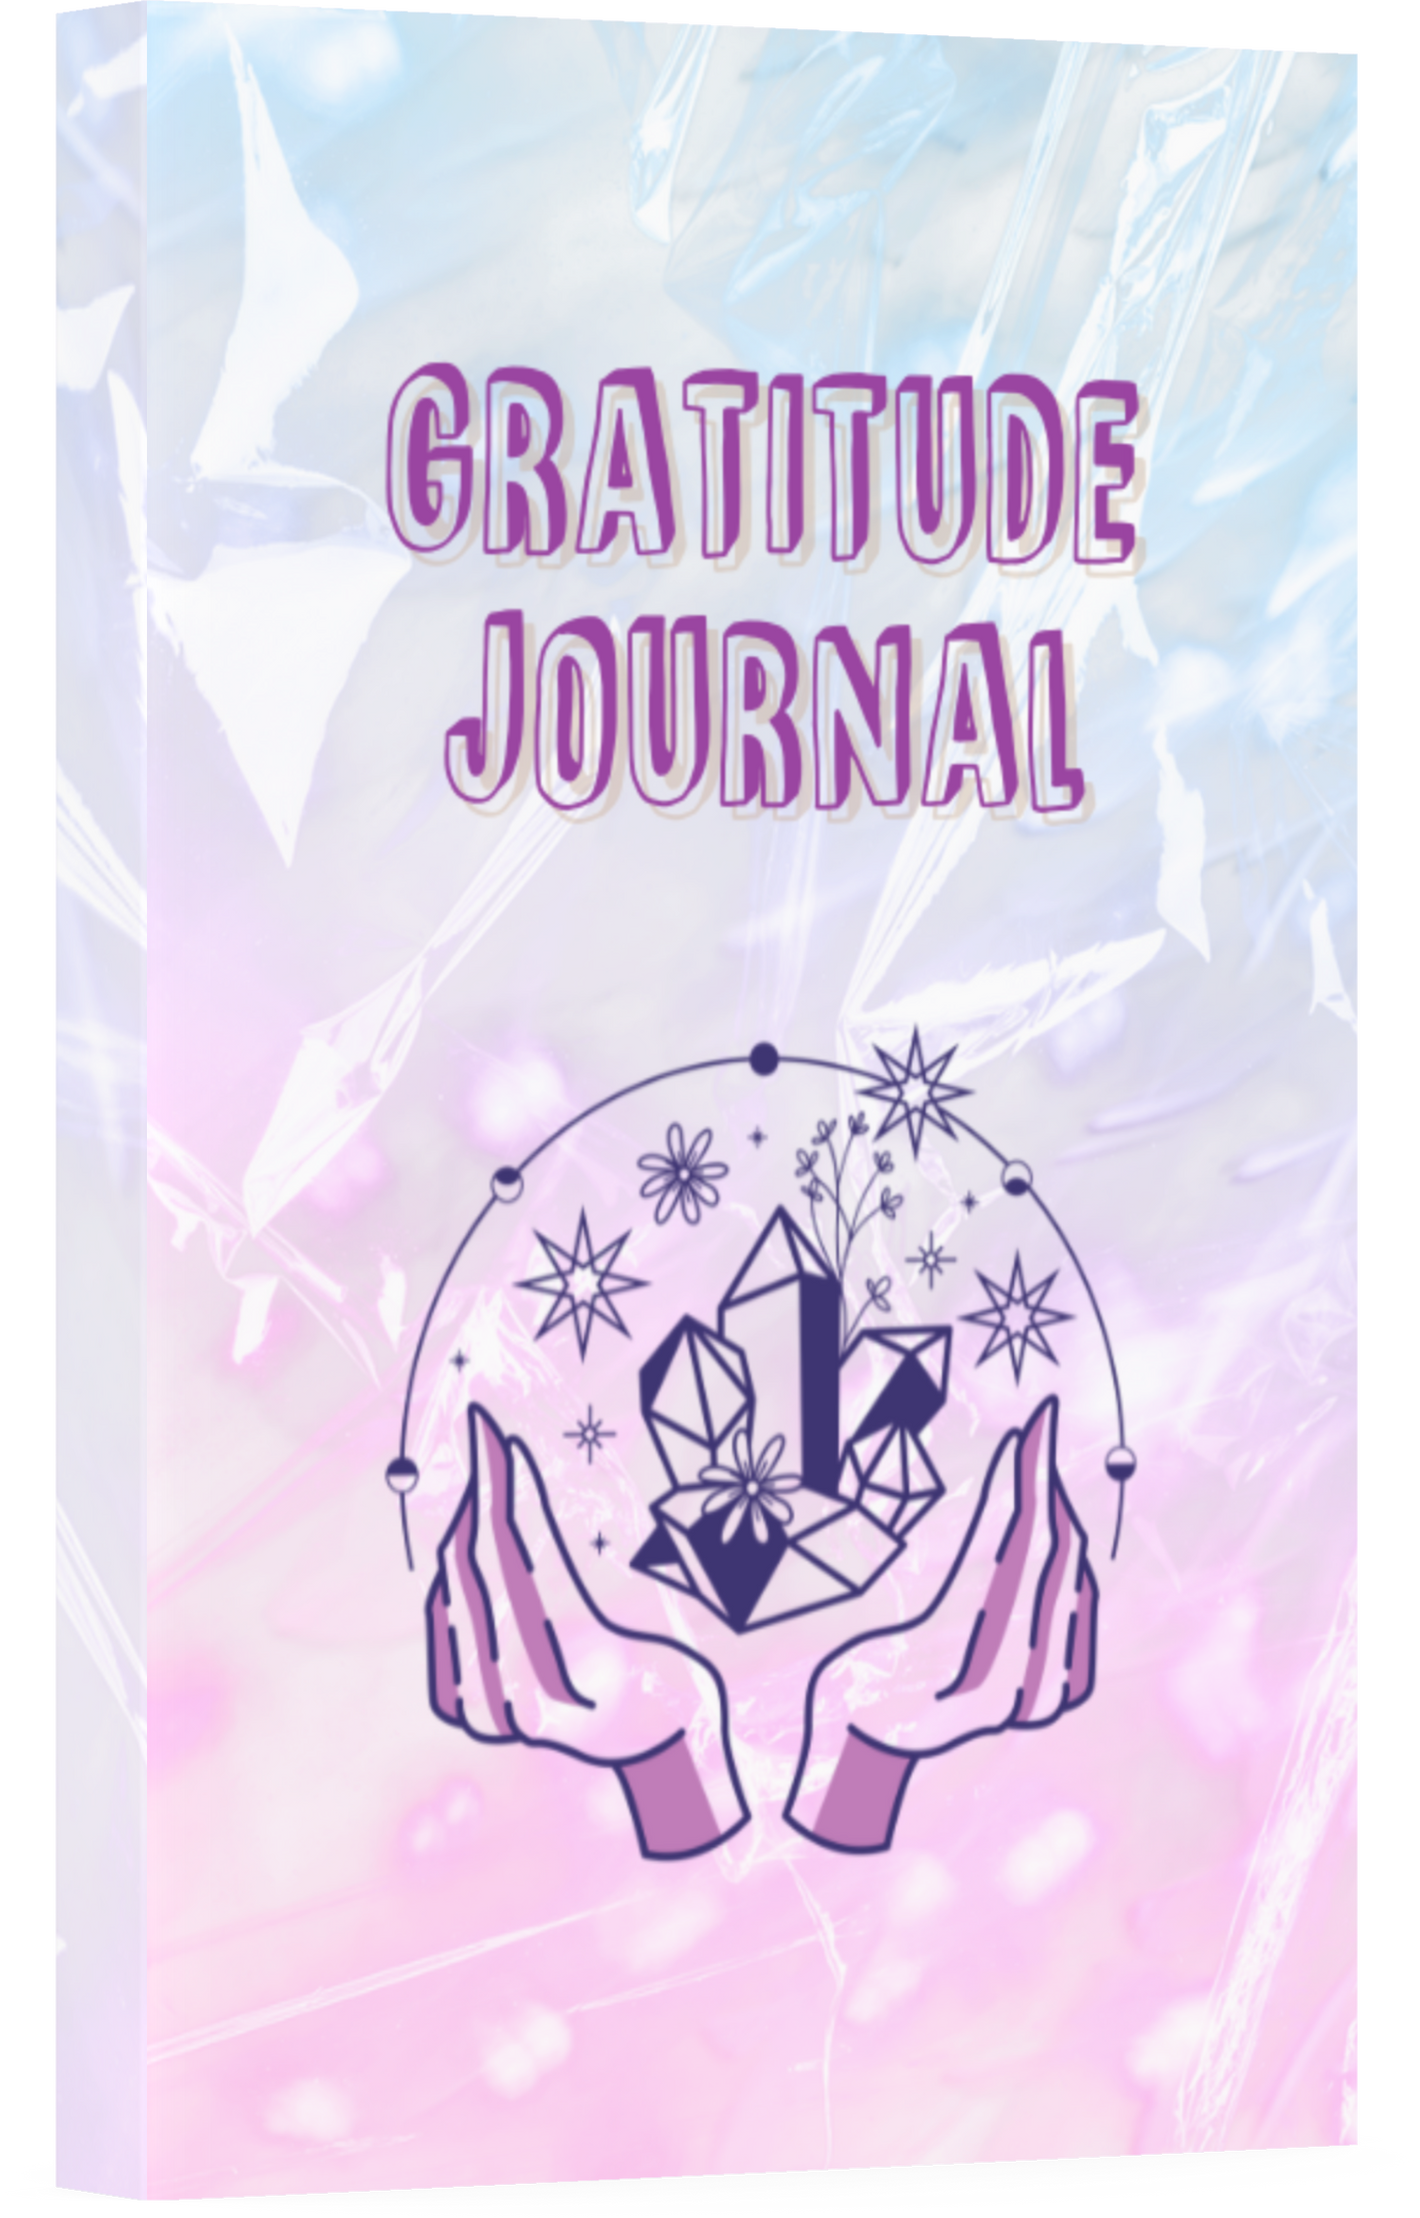 A journal in a transparent background